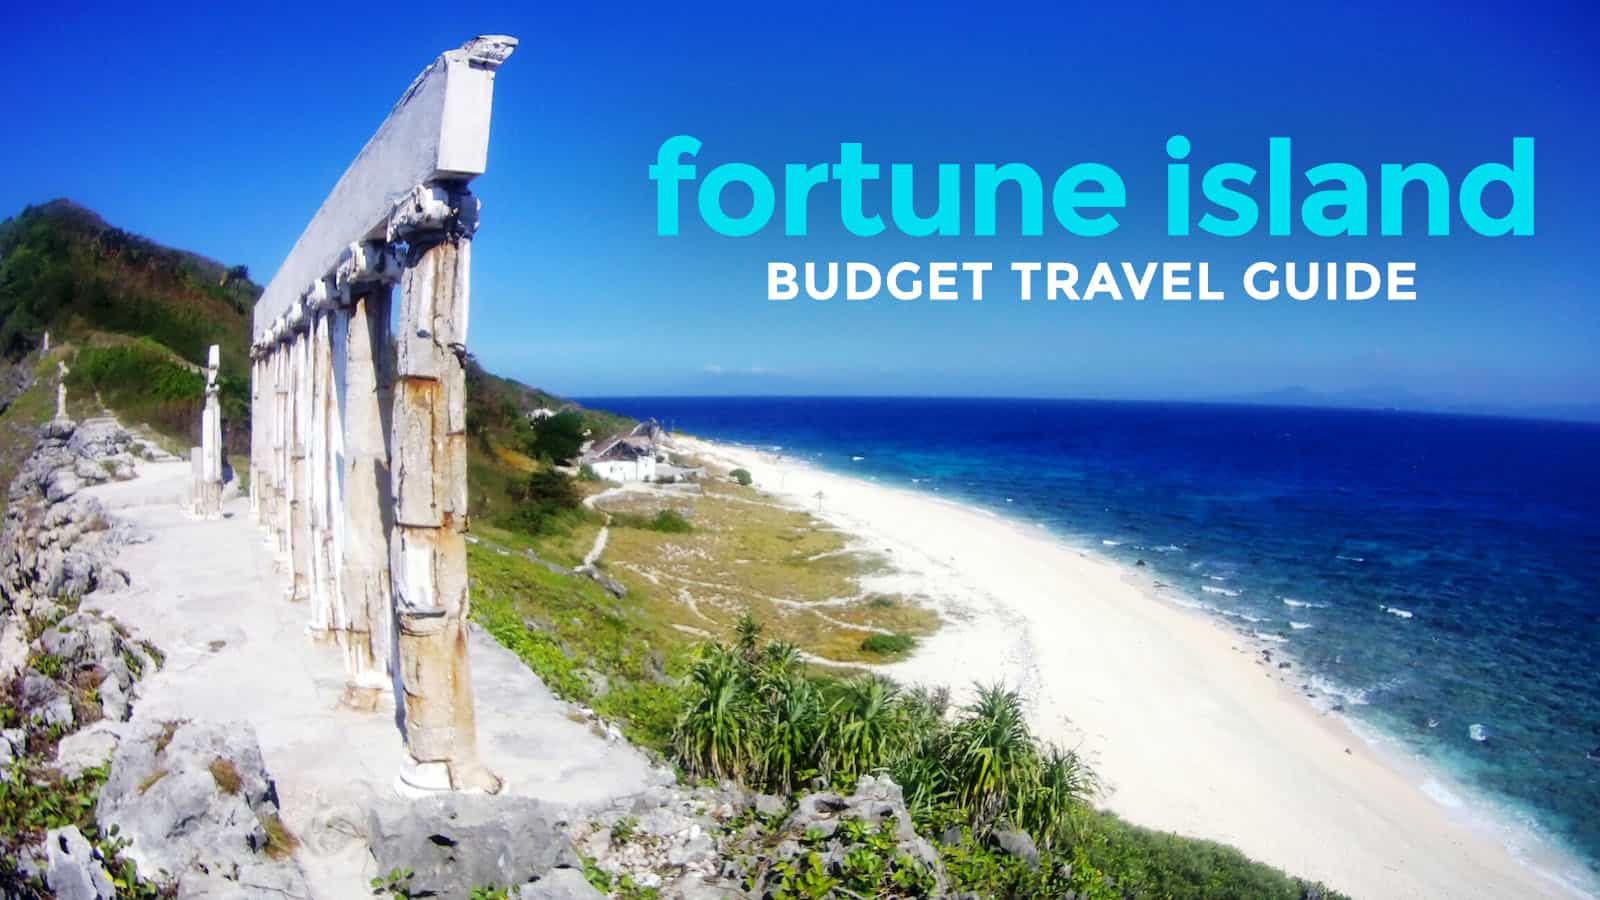 FORTUNE ISLAND TRAVEL GUIDE with Budget Itinerary